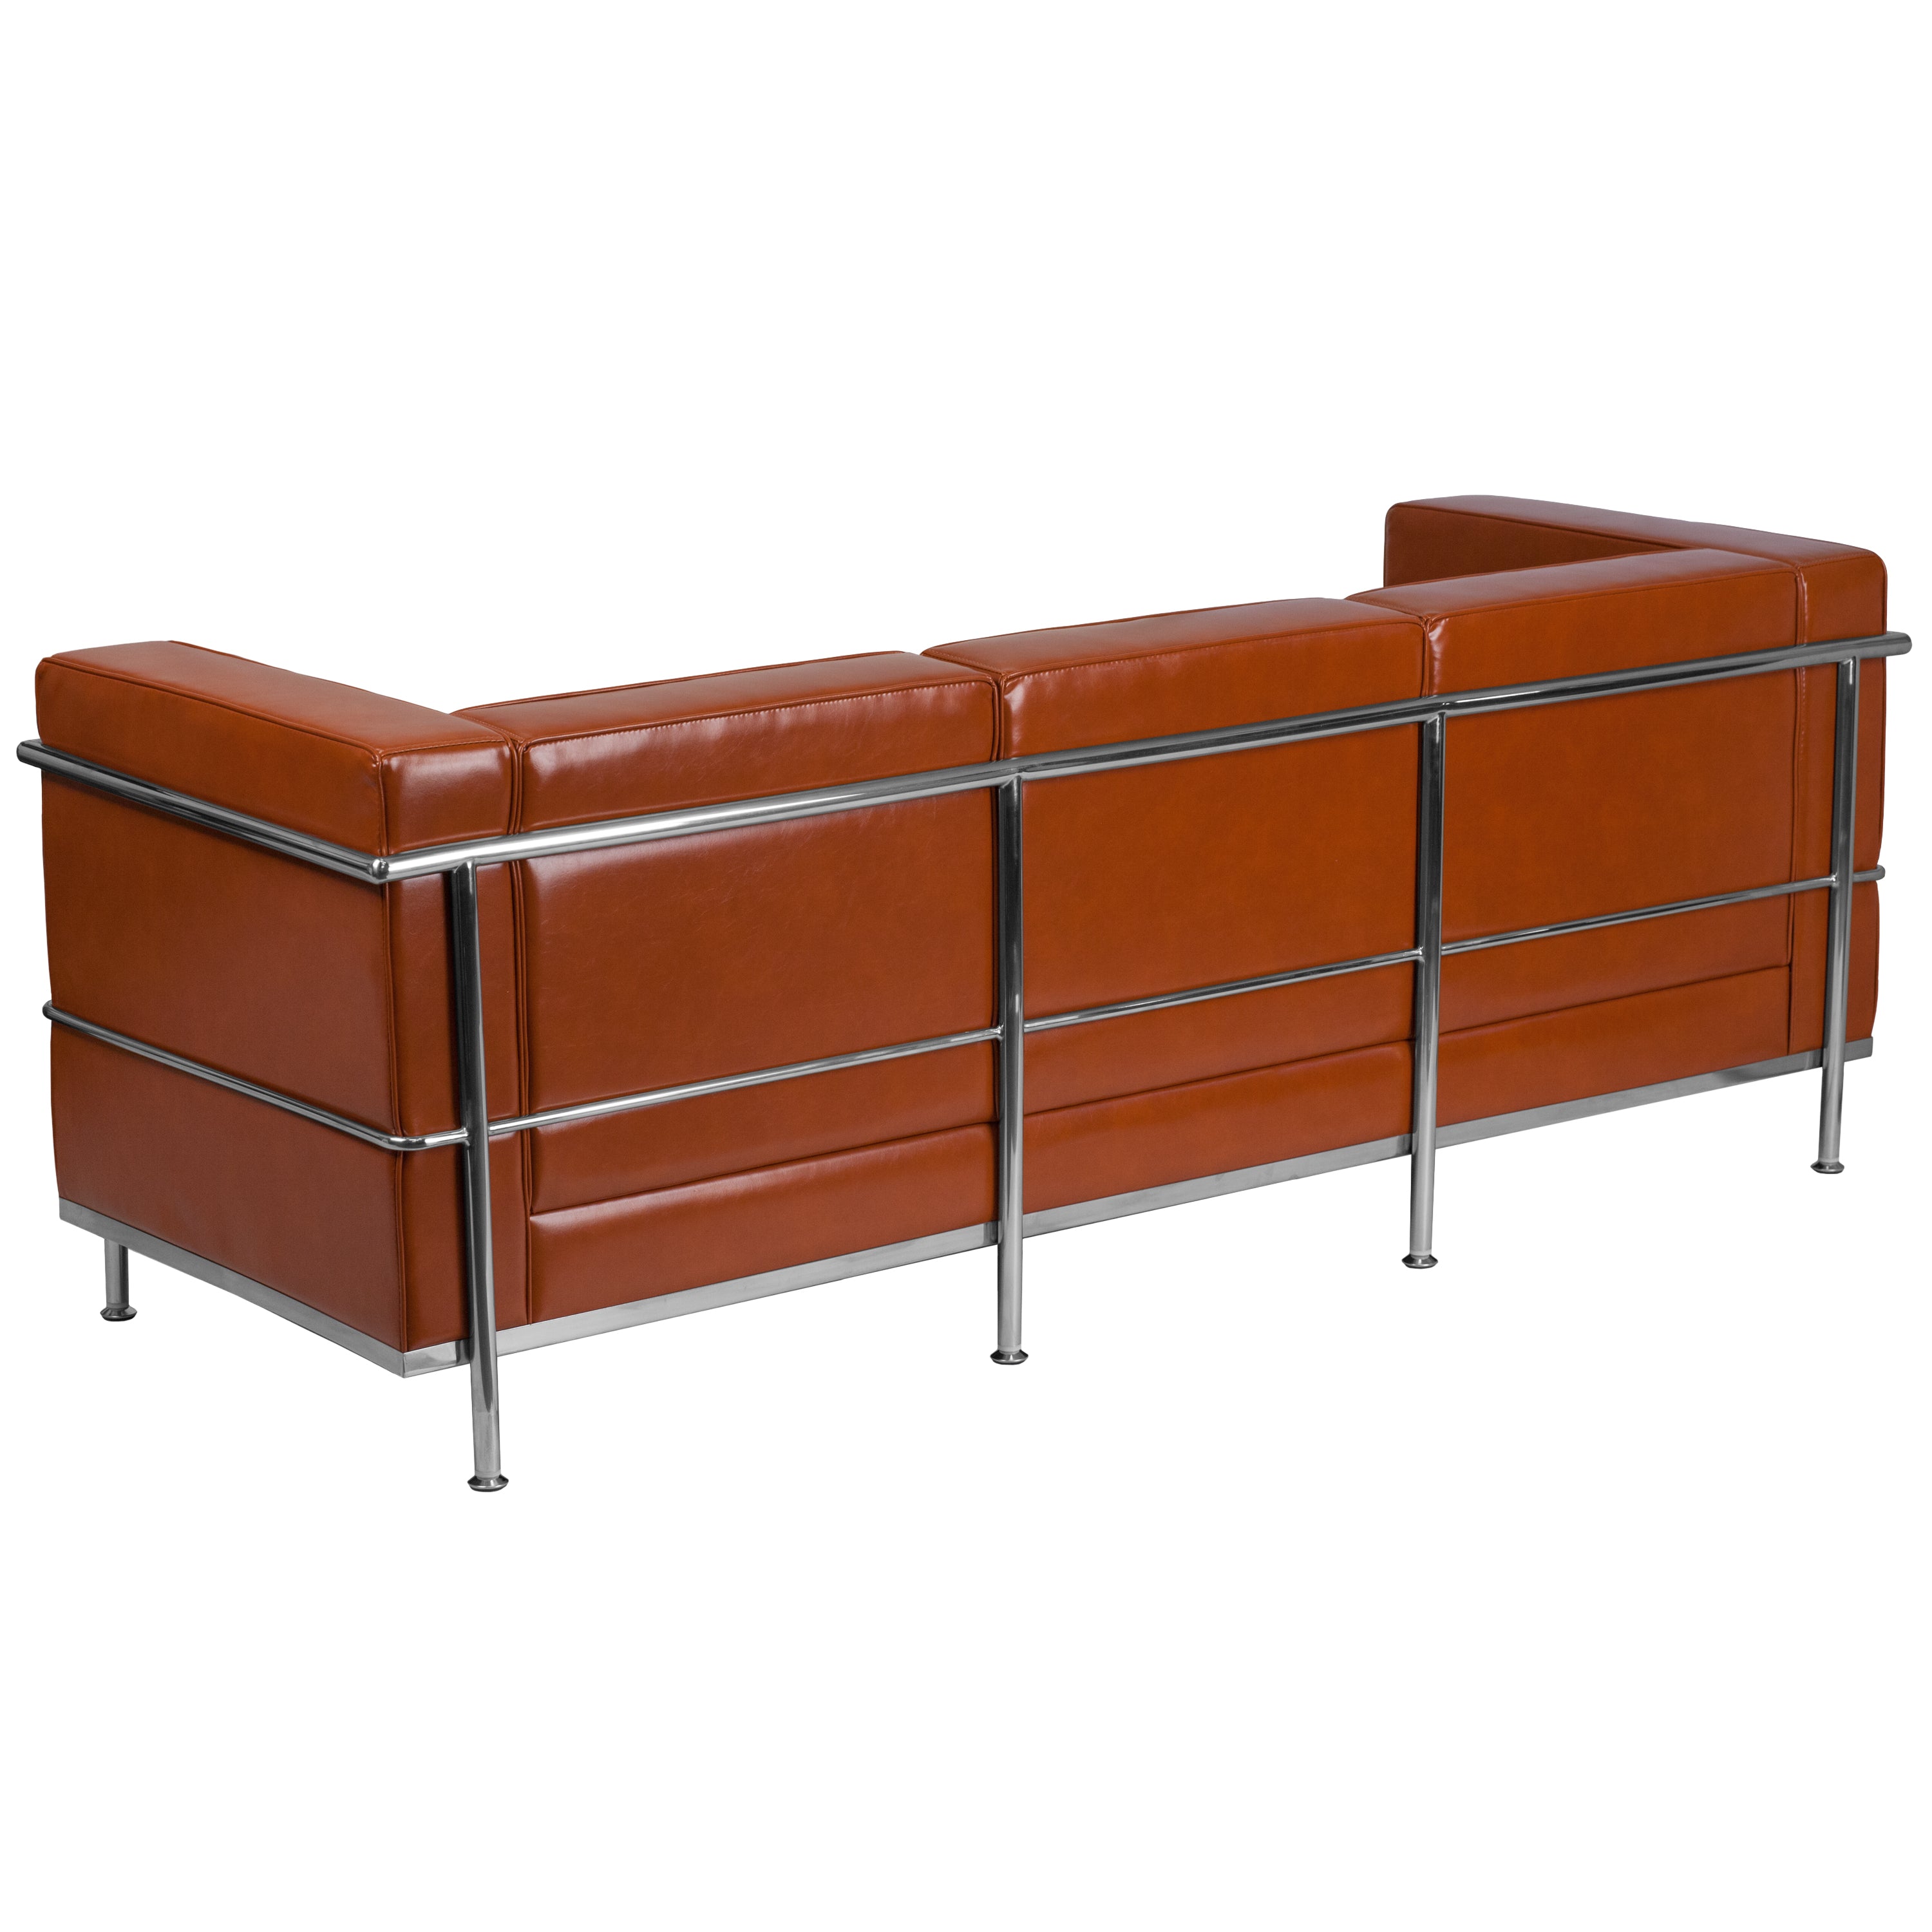 Hercules Regal Series Contemporary LeatherSoft Sofa with Encasing Frame-Reception Sofa-Flash Furniture-Wall2Wall Furnishings